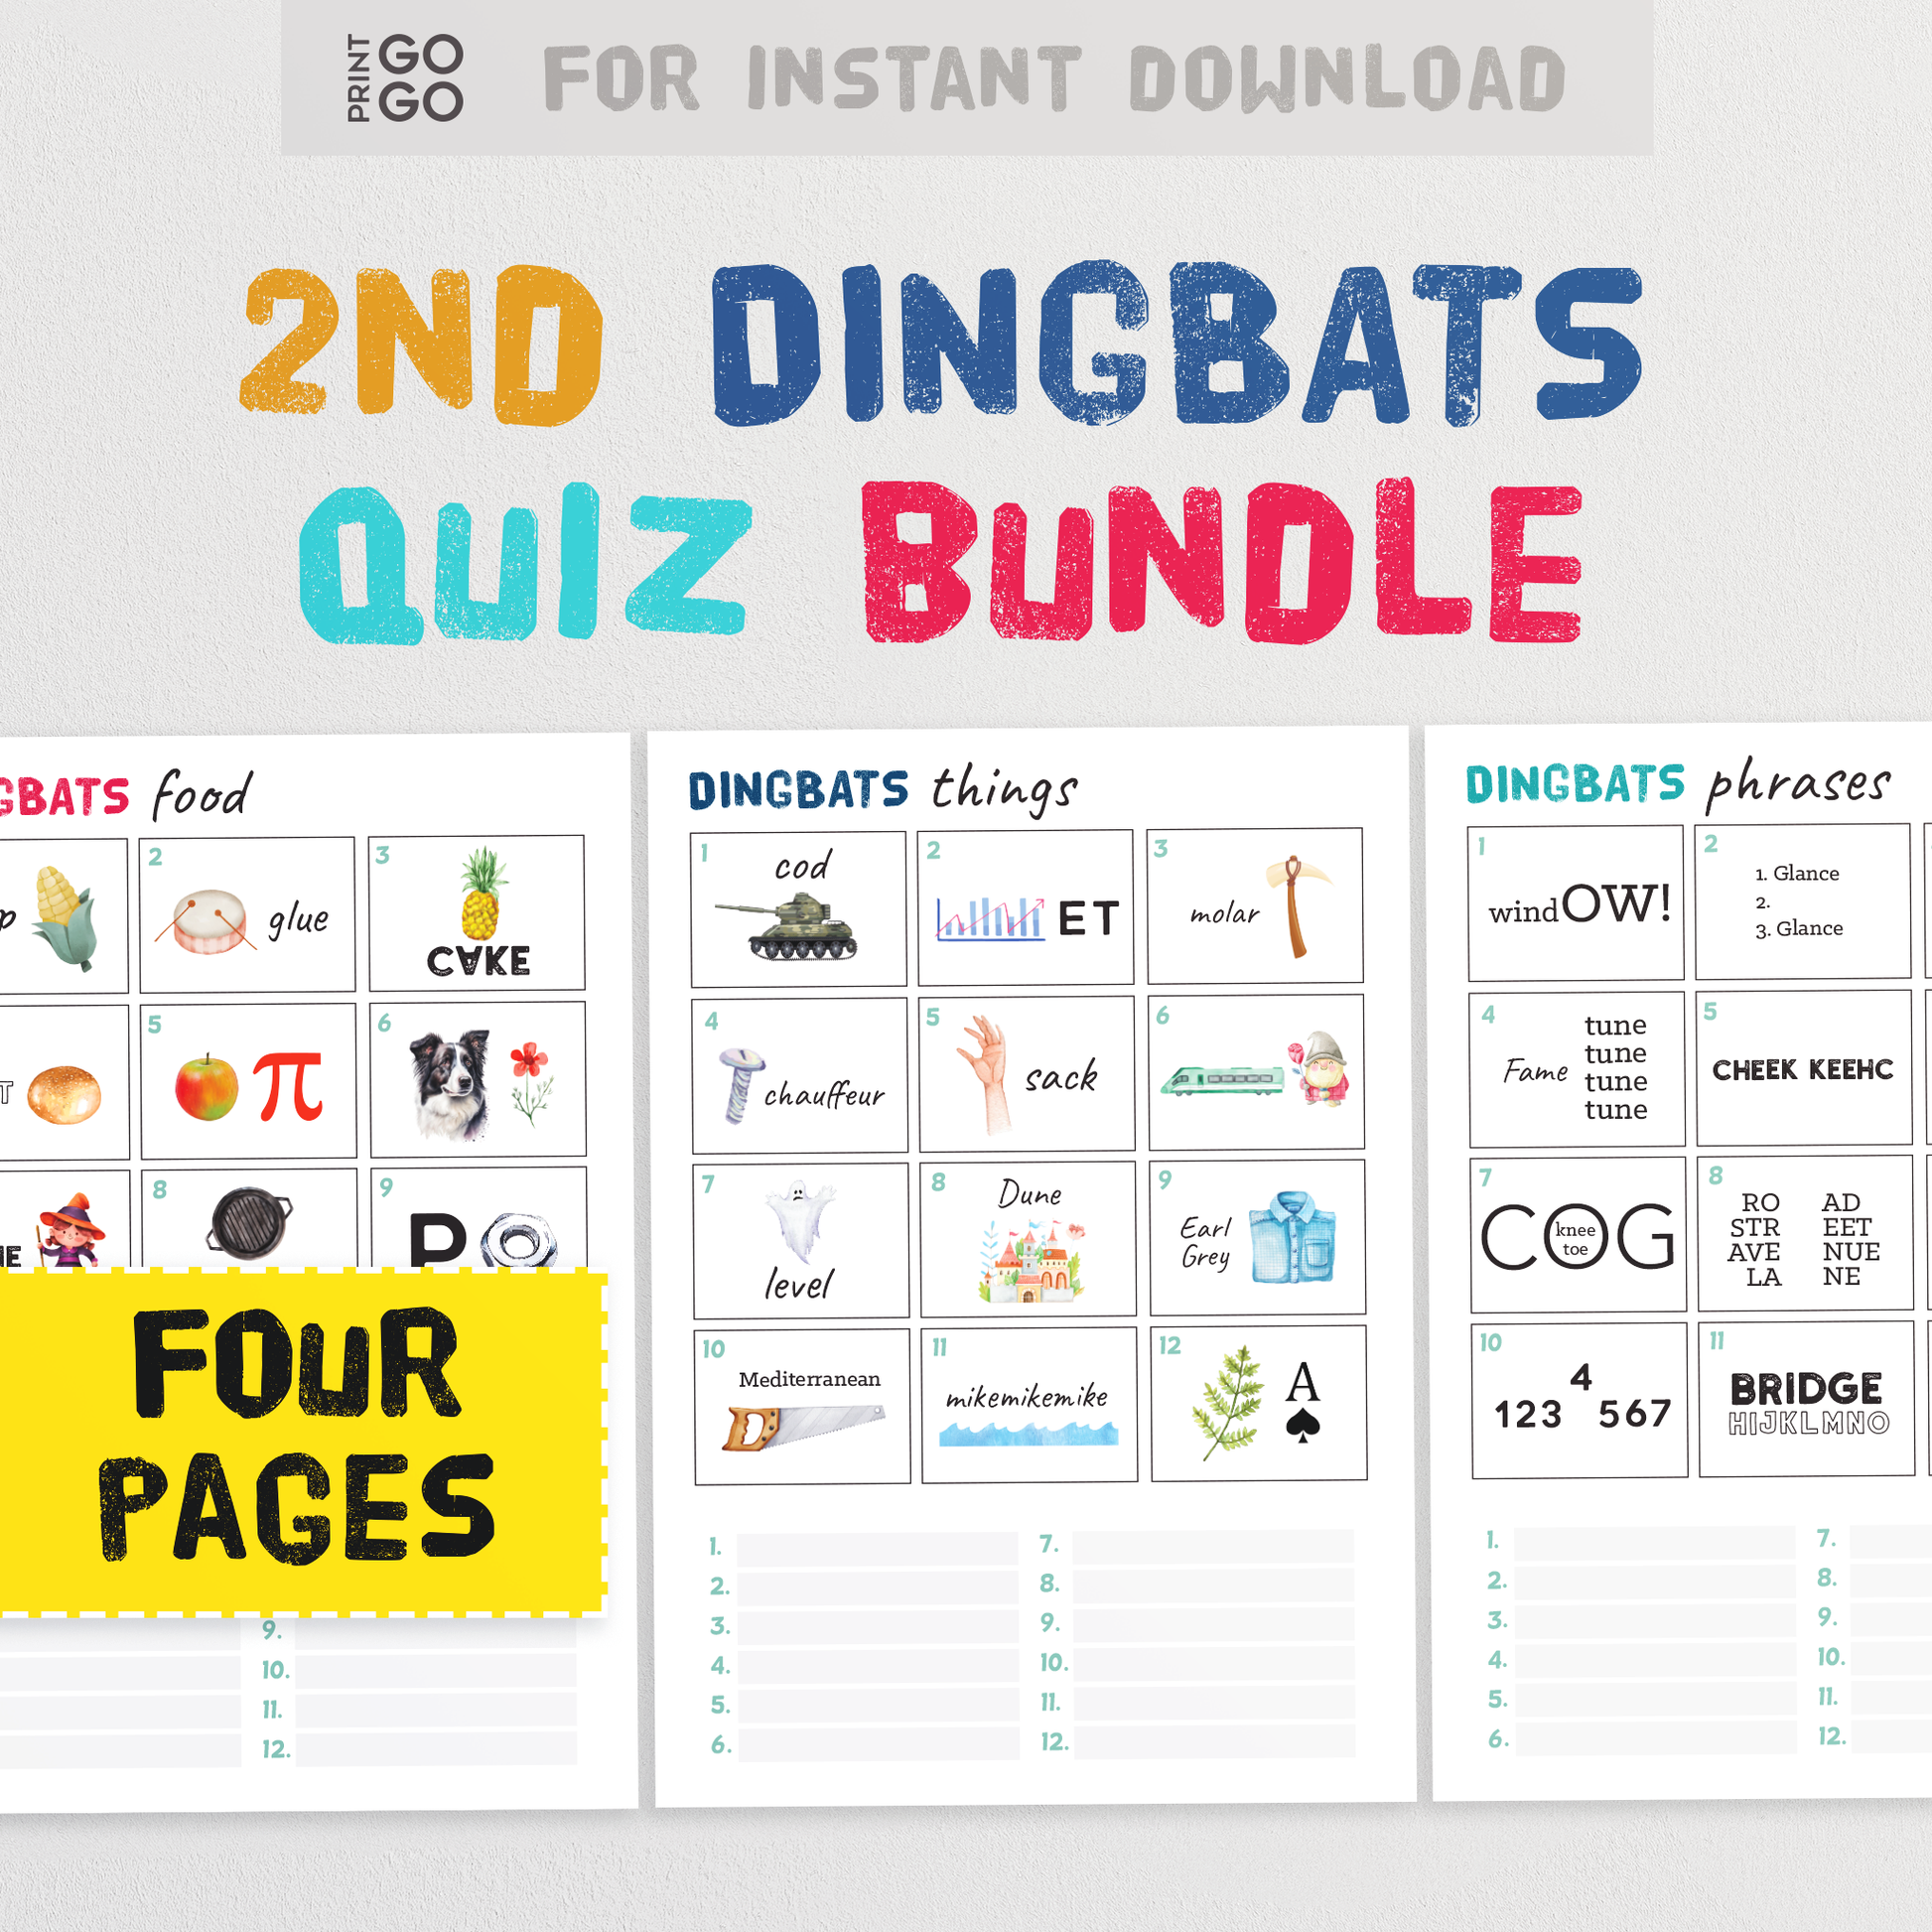 Second Dingbats Picture Quiz Puzzles - The Fun Guess the Phrase Game!